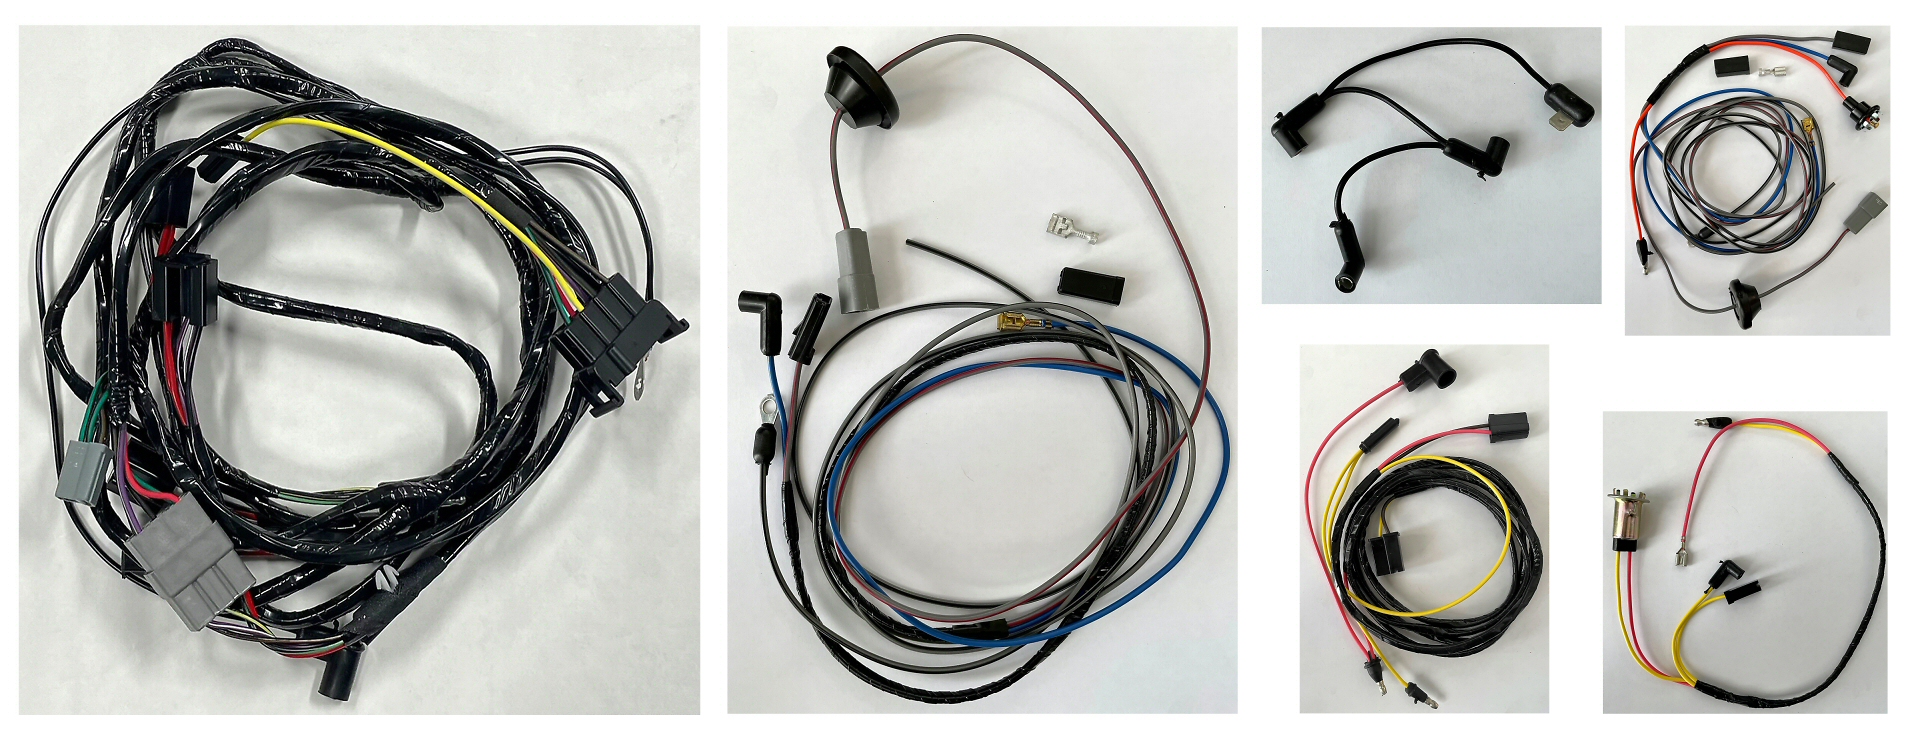 Wiring Harnesses for Sale